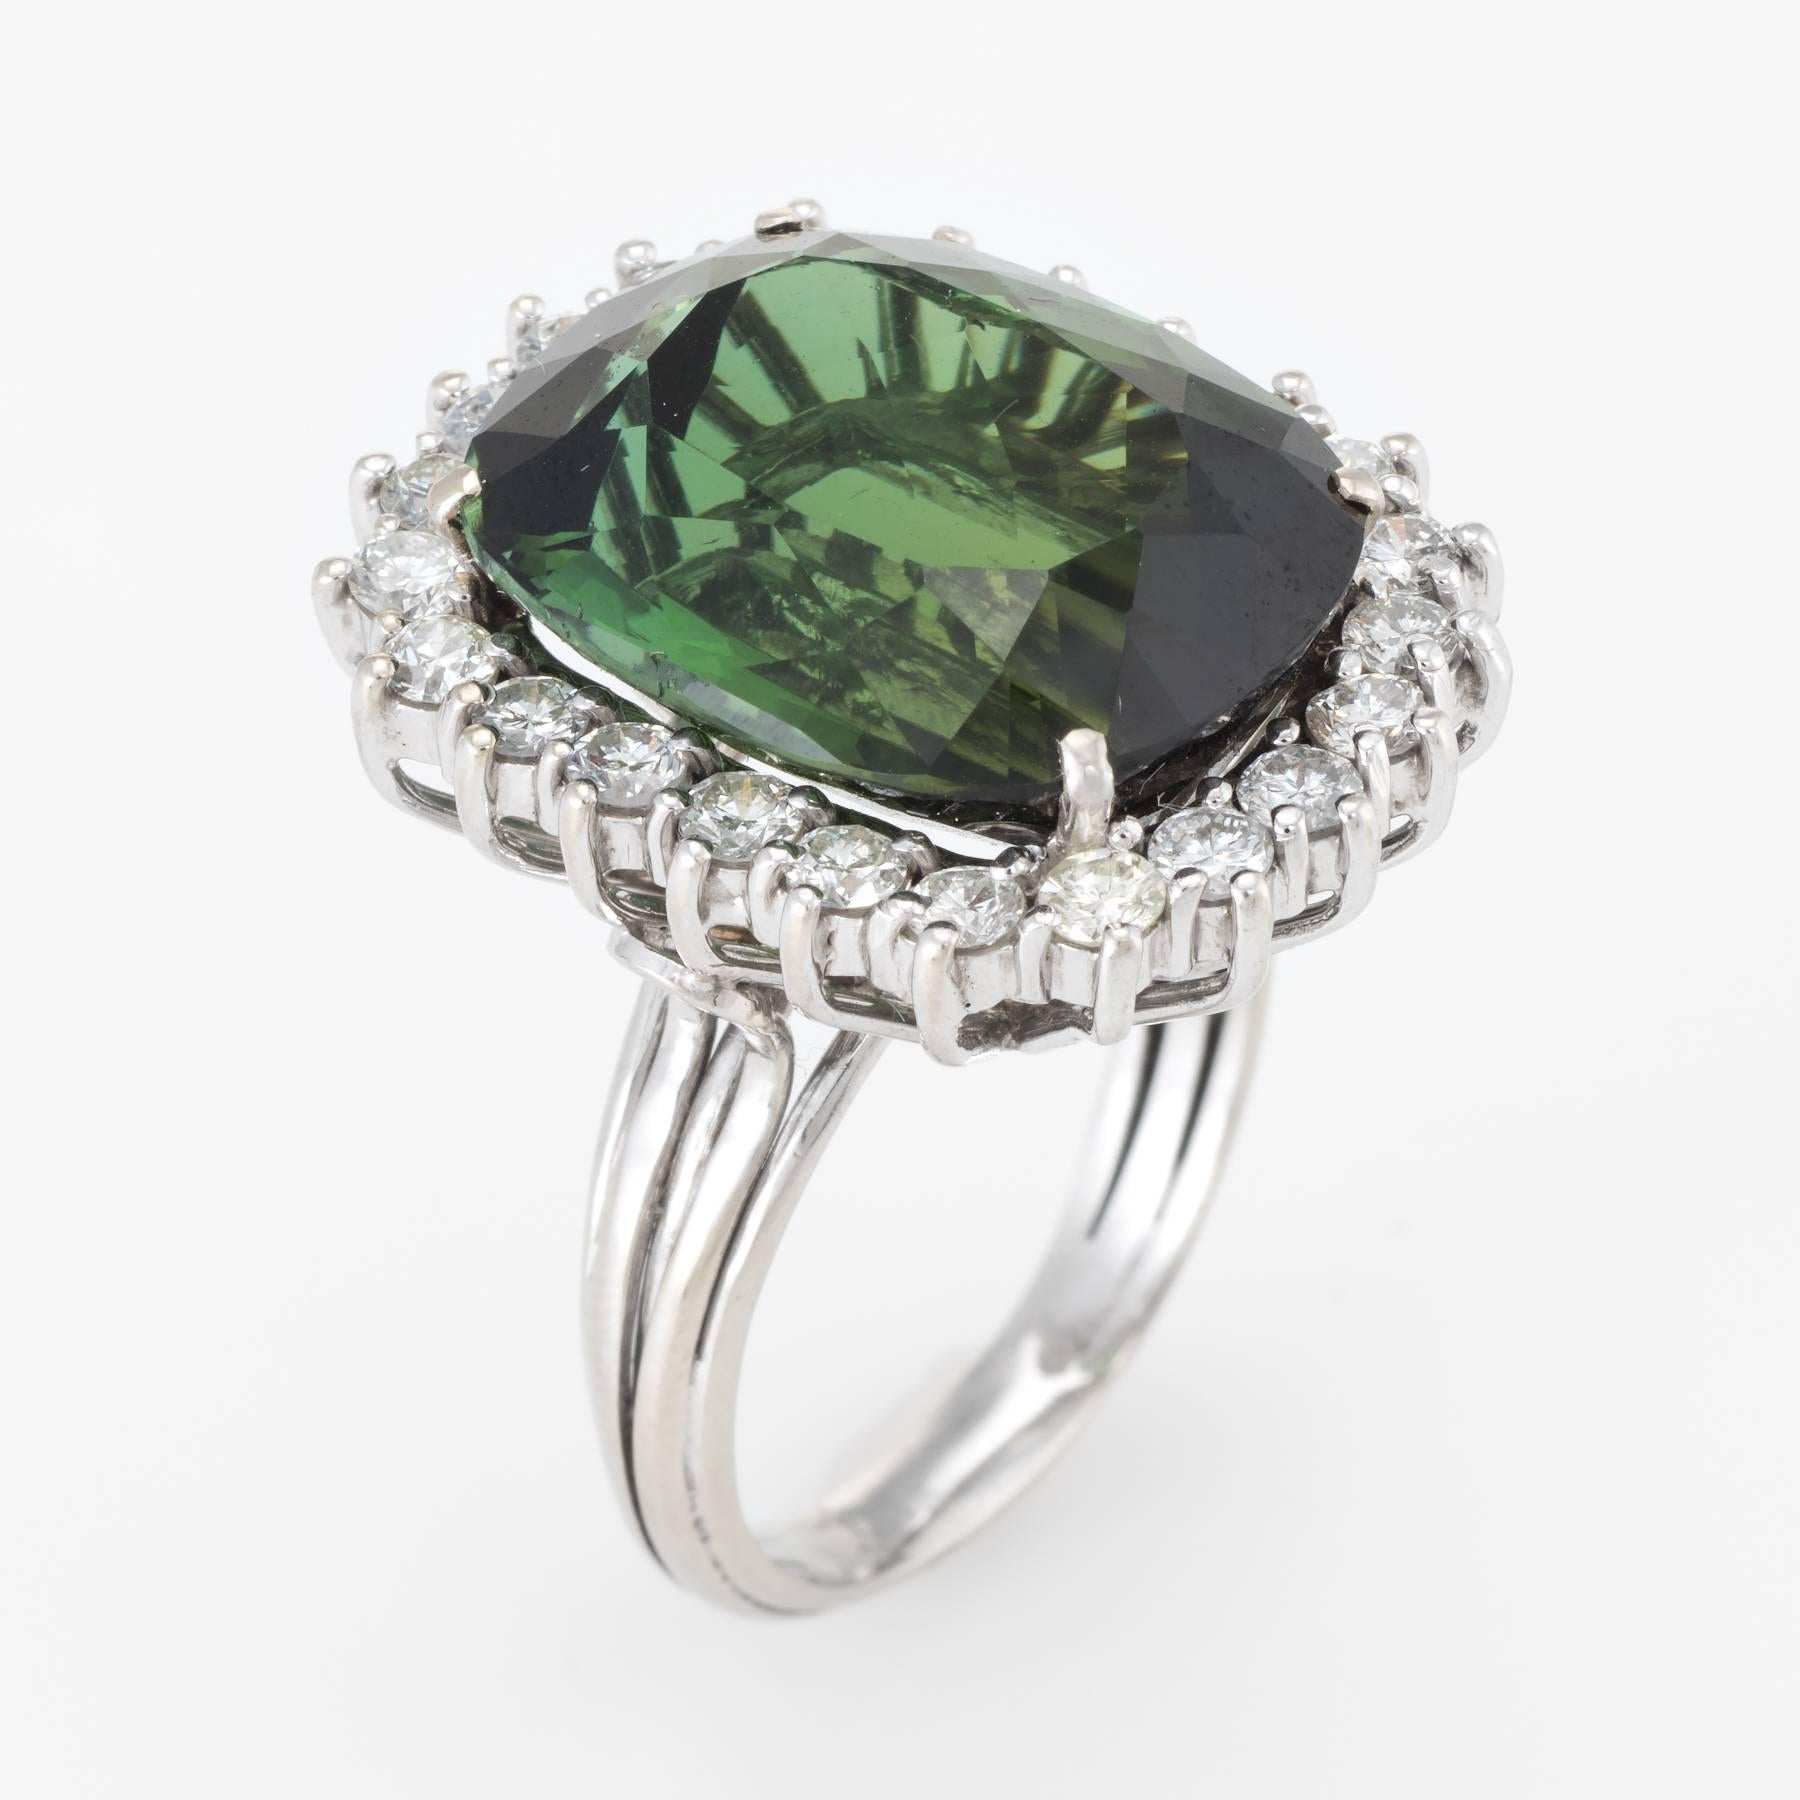 Elegant vintage cocktail ring (circa 1960s), crafted in 14 karat white gold. 

Centrally mounted cushion cut pine green tourmaline measures 18mm x 15mm (estimated at 18.63 carats), accented with an estimated 1.70 carats of round brilliant cut